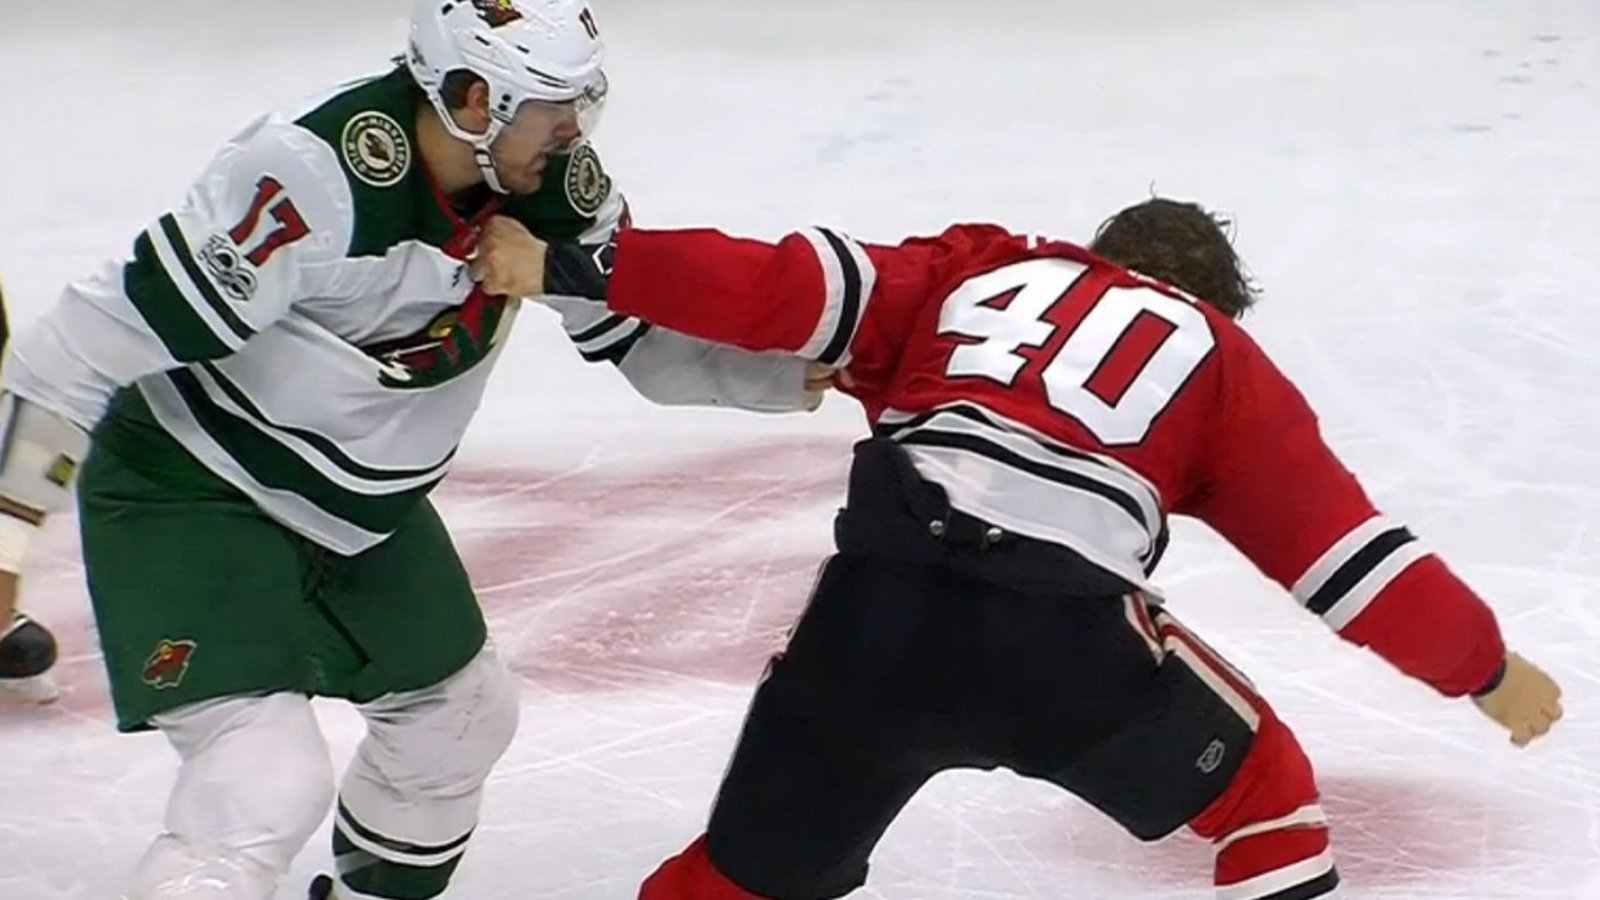 Your replay: Hayden lands the biggest punch of the NHL season!